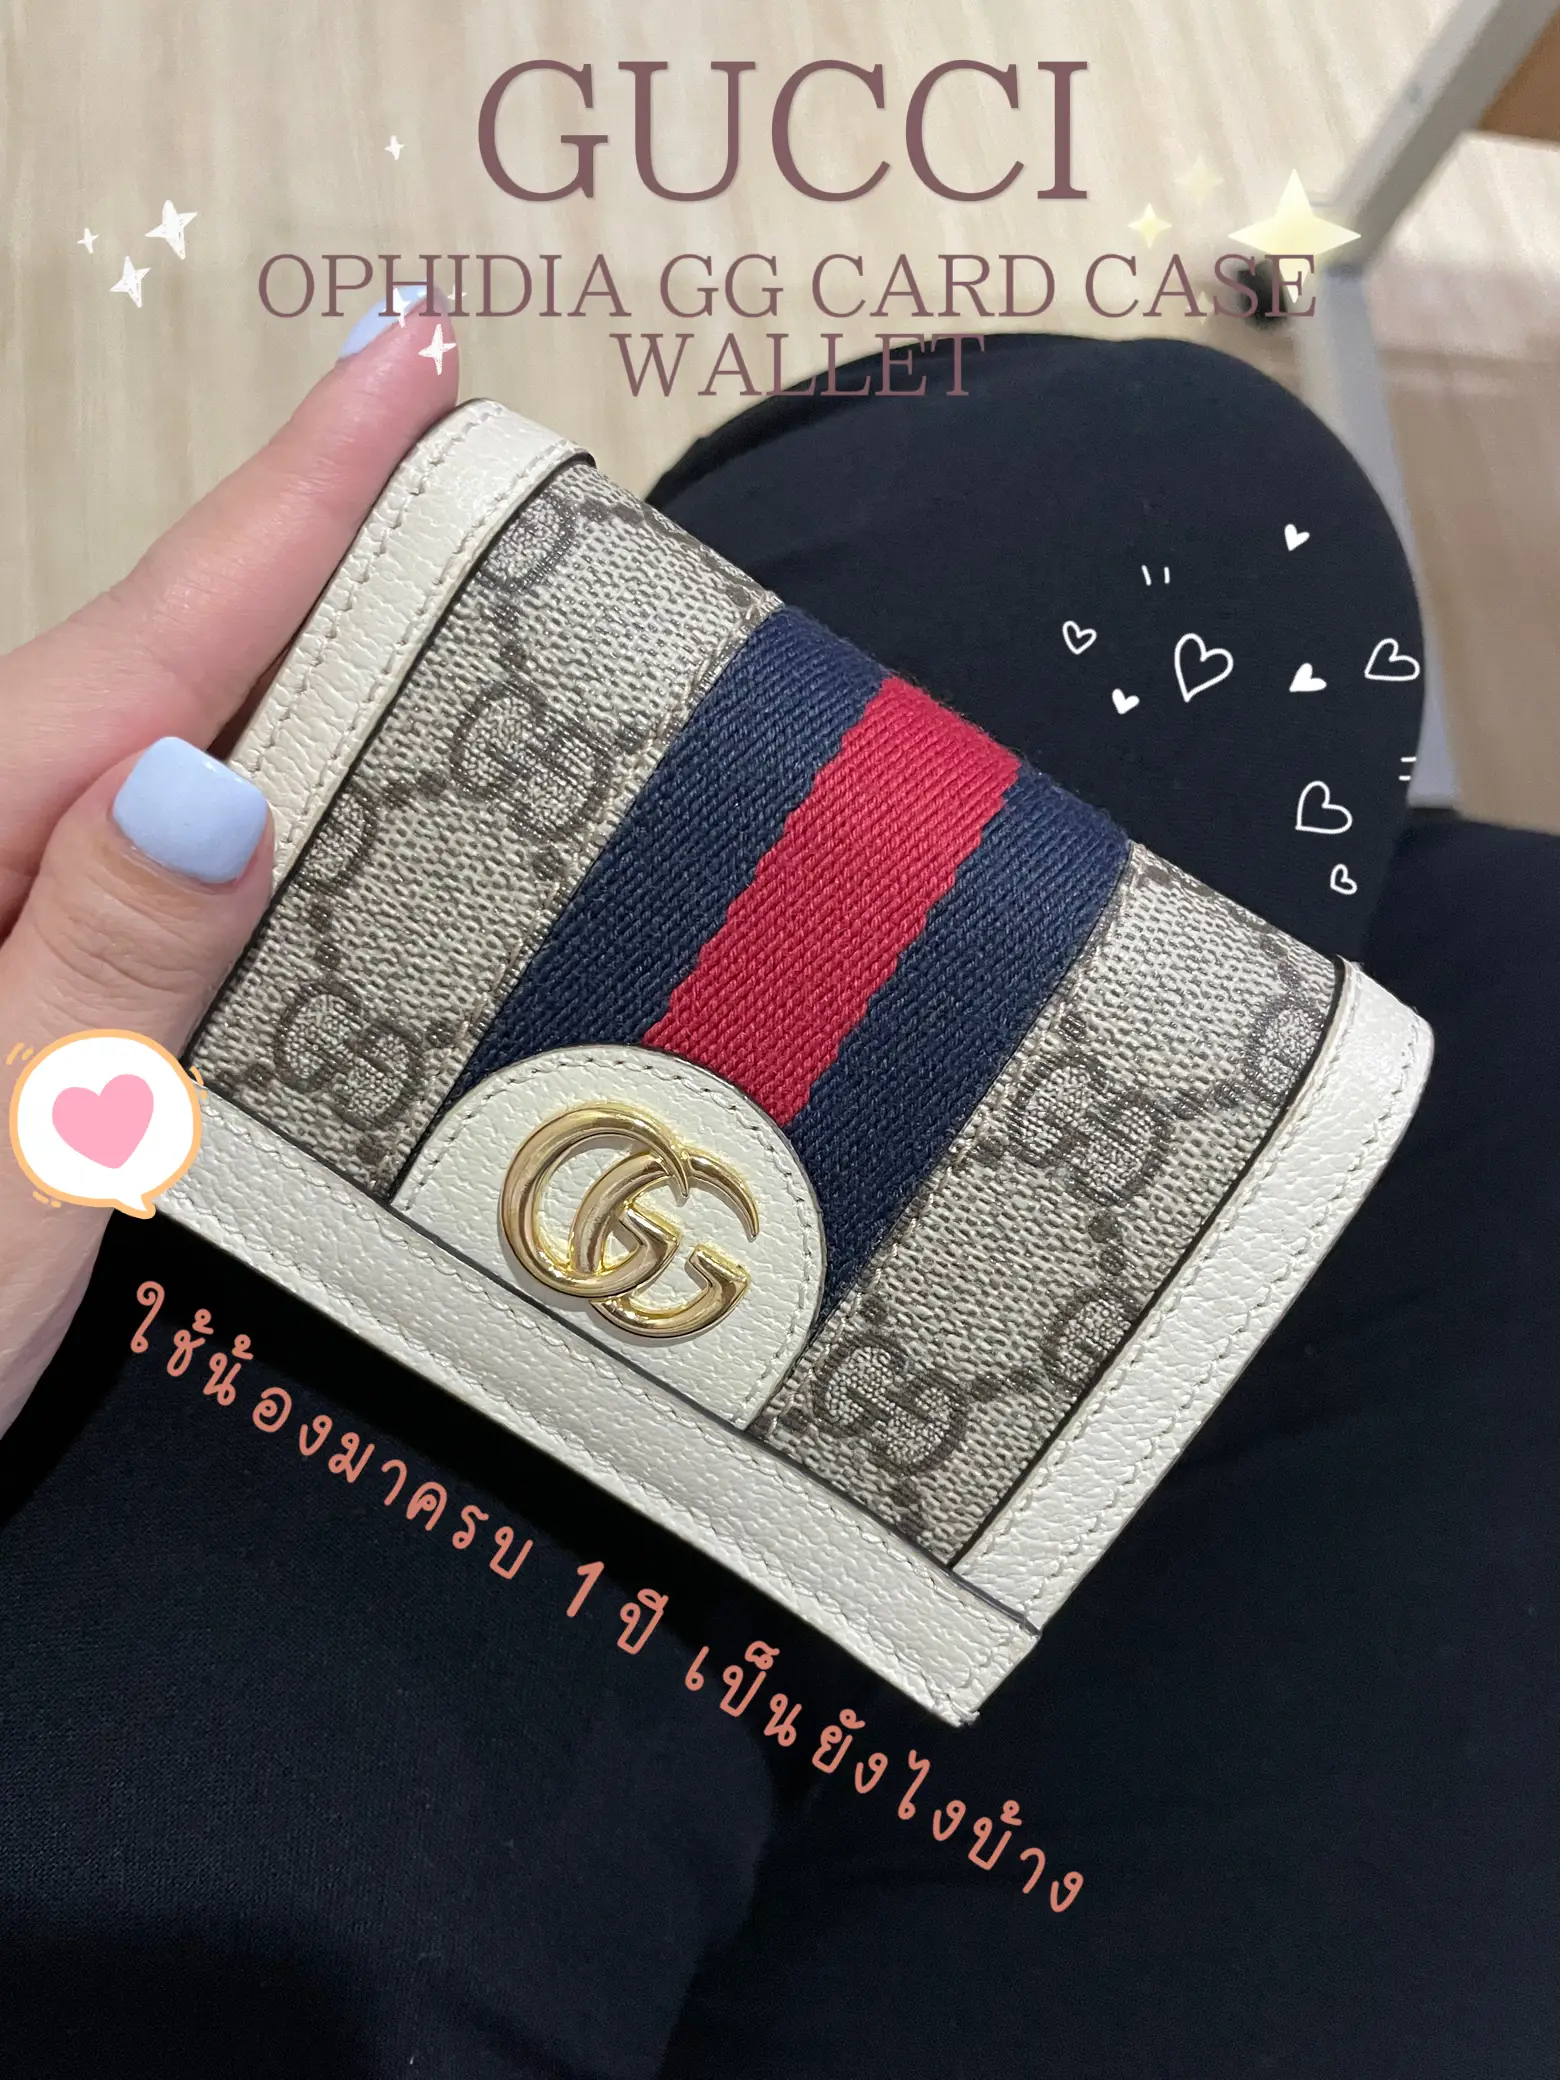 Ophidia GG Supreme Card Case With Lanyard